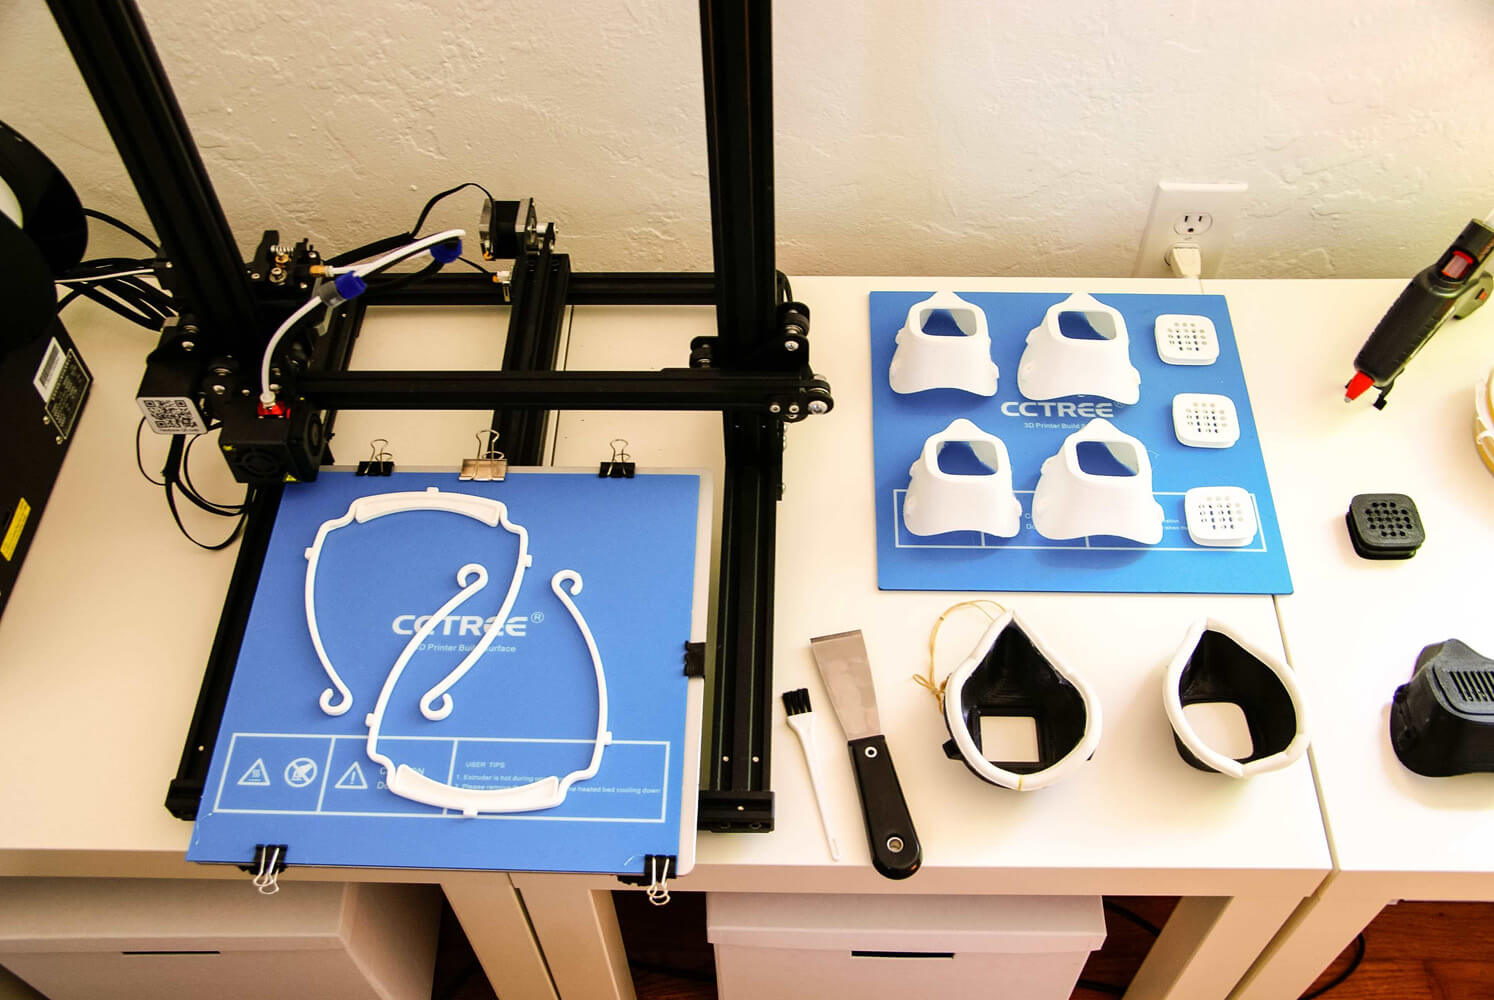 Contribution from MAPS, an organization with 3D printing capabilities located in Portland, Oregon